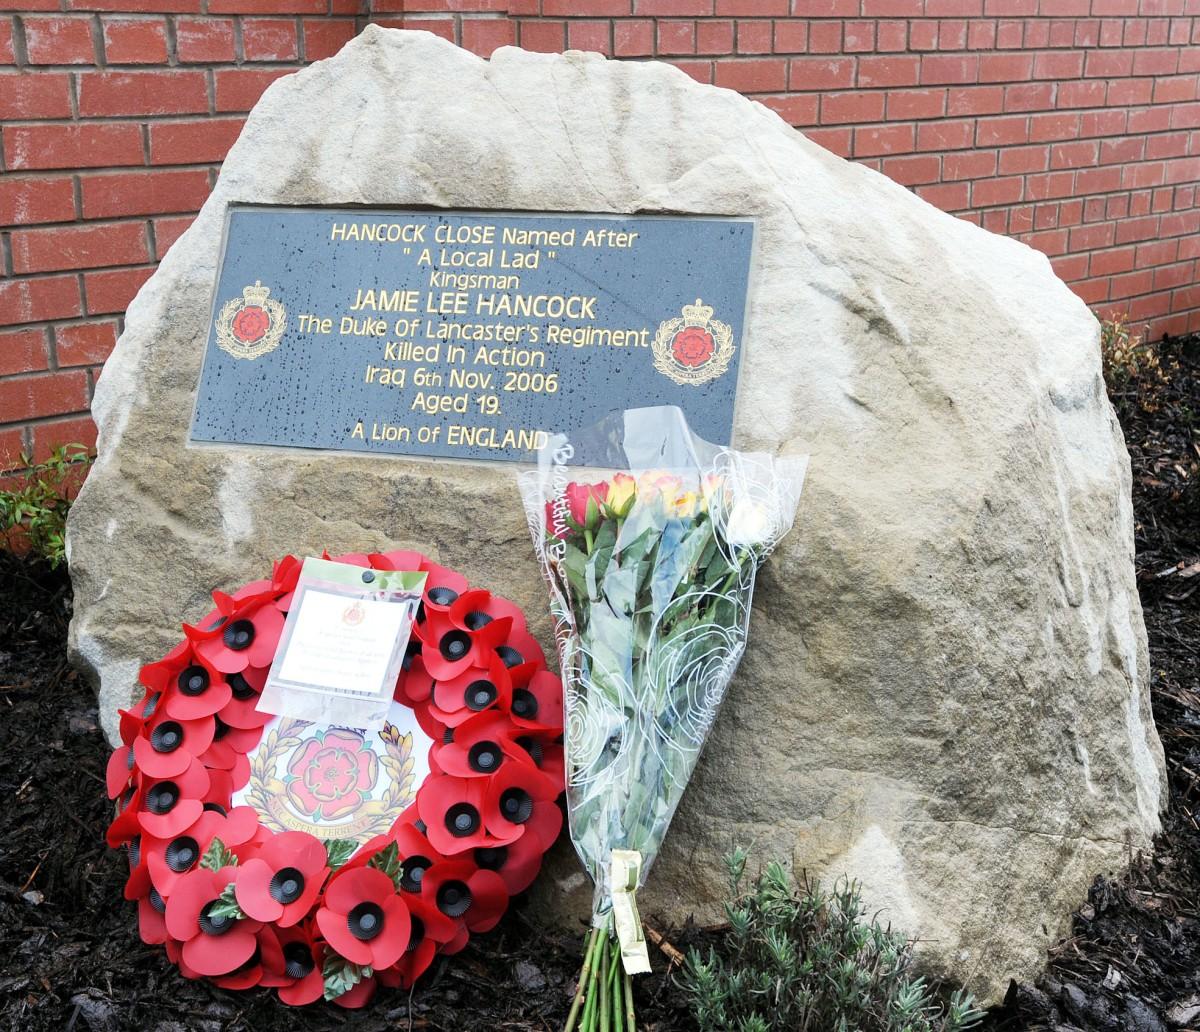 The memorial stone describes Jamie as a ‘local lad killed in action’